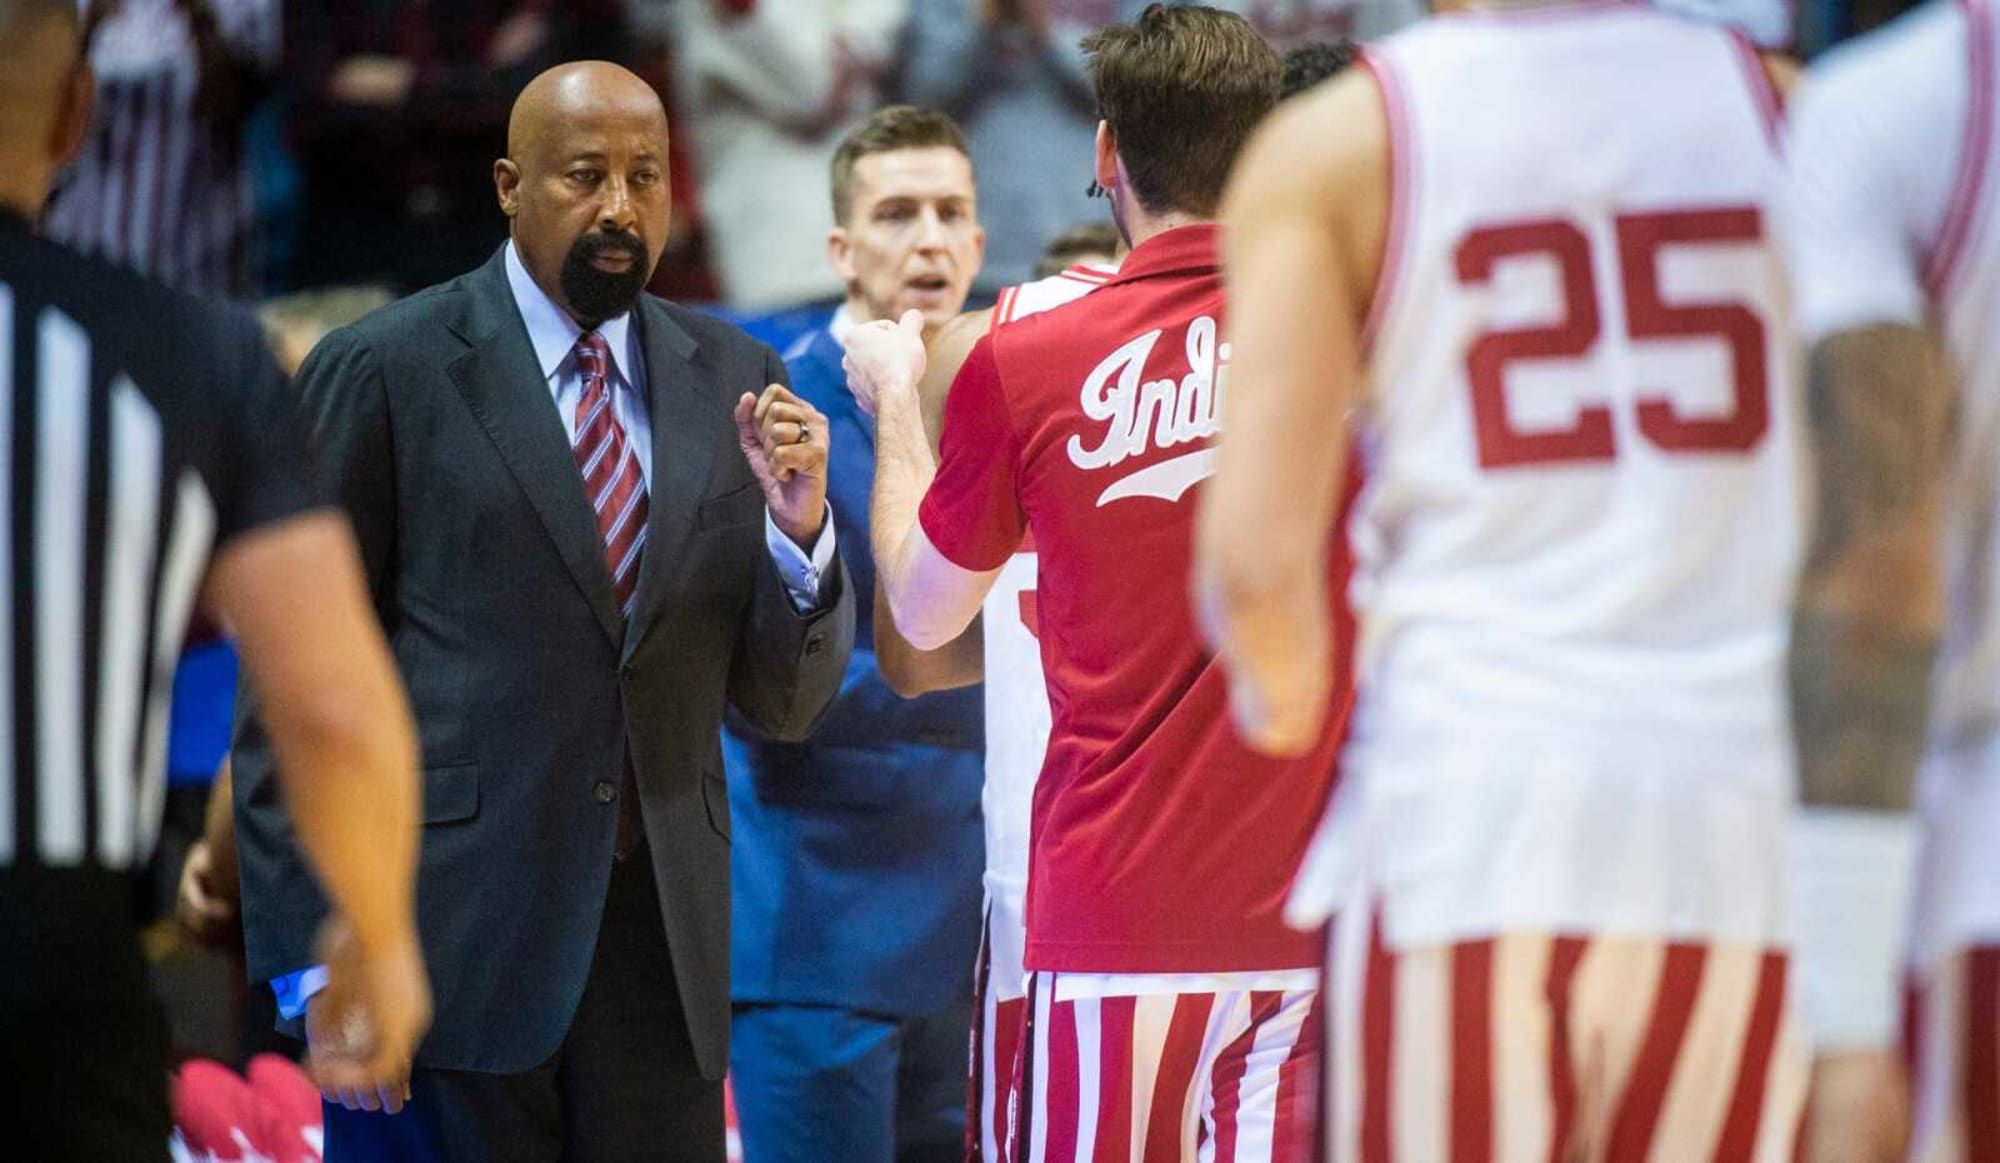 Indiana basketball vs. Minnesota: How to watch, betting tips, & more